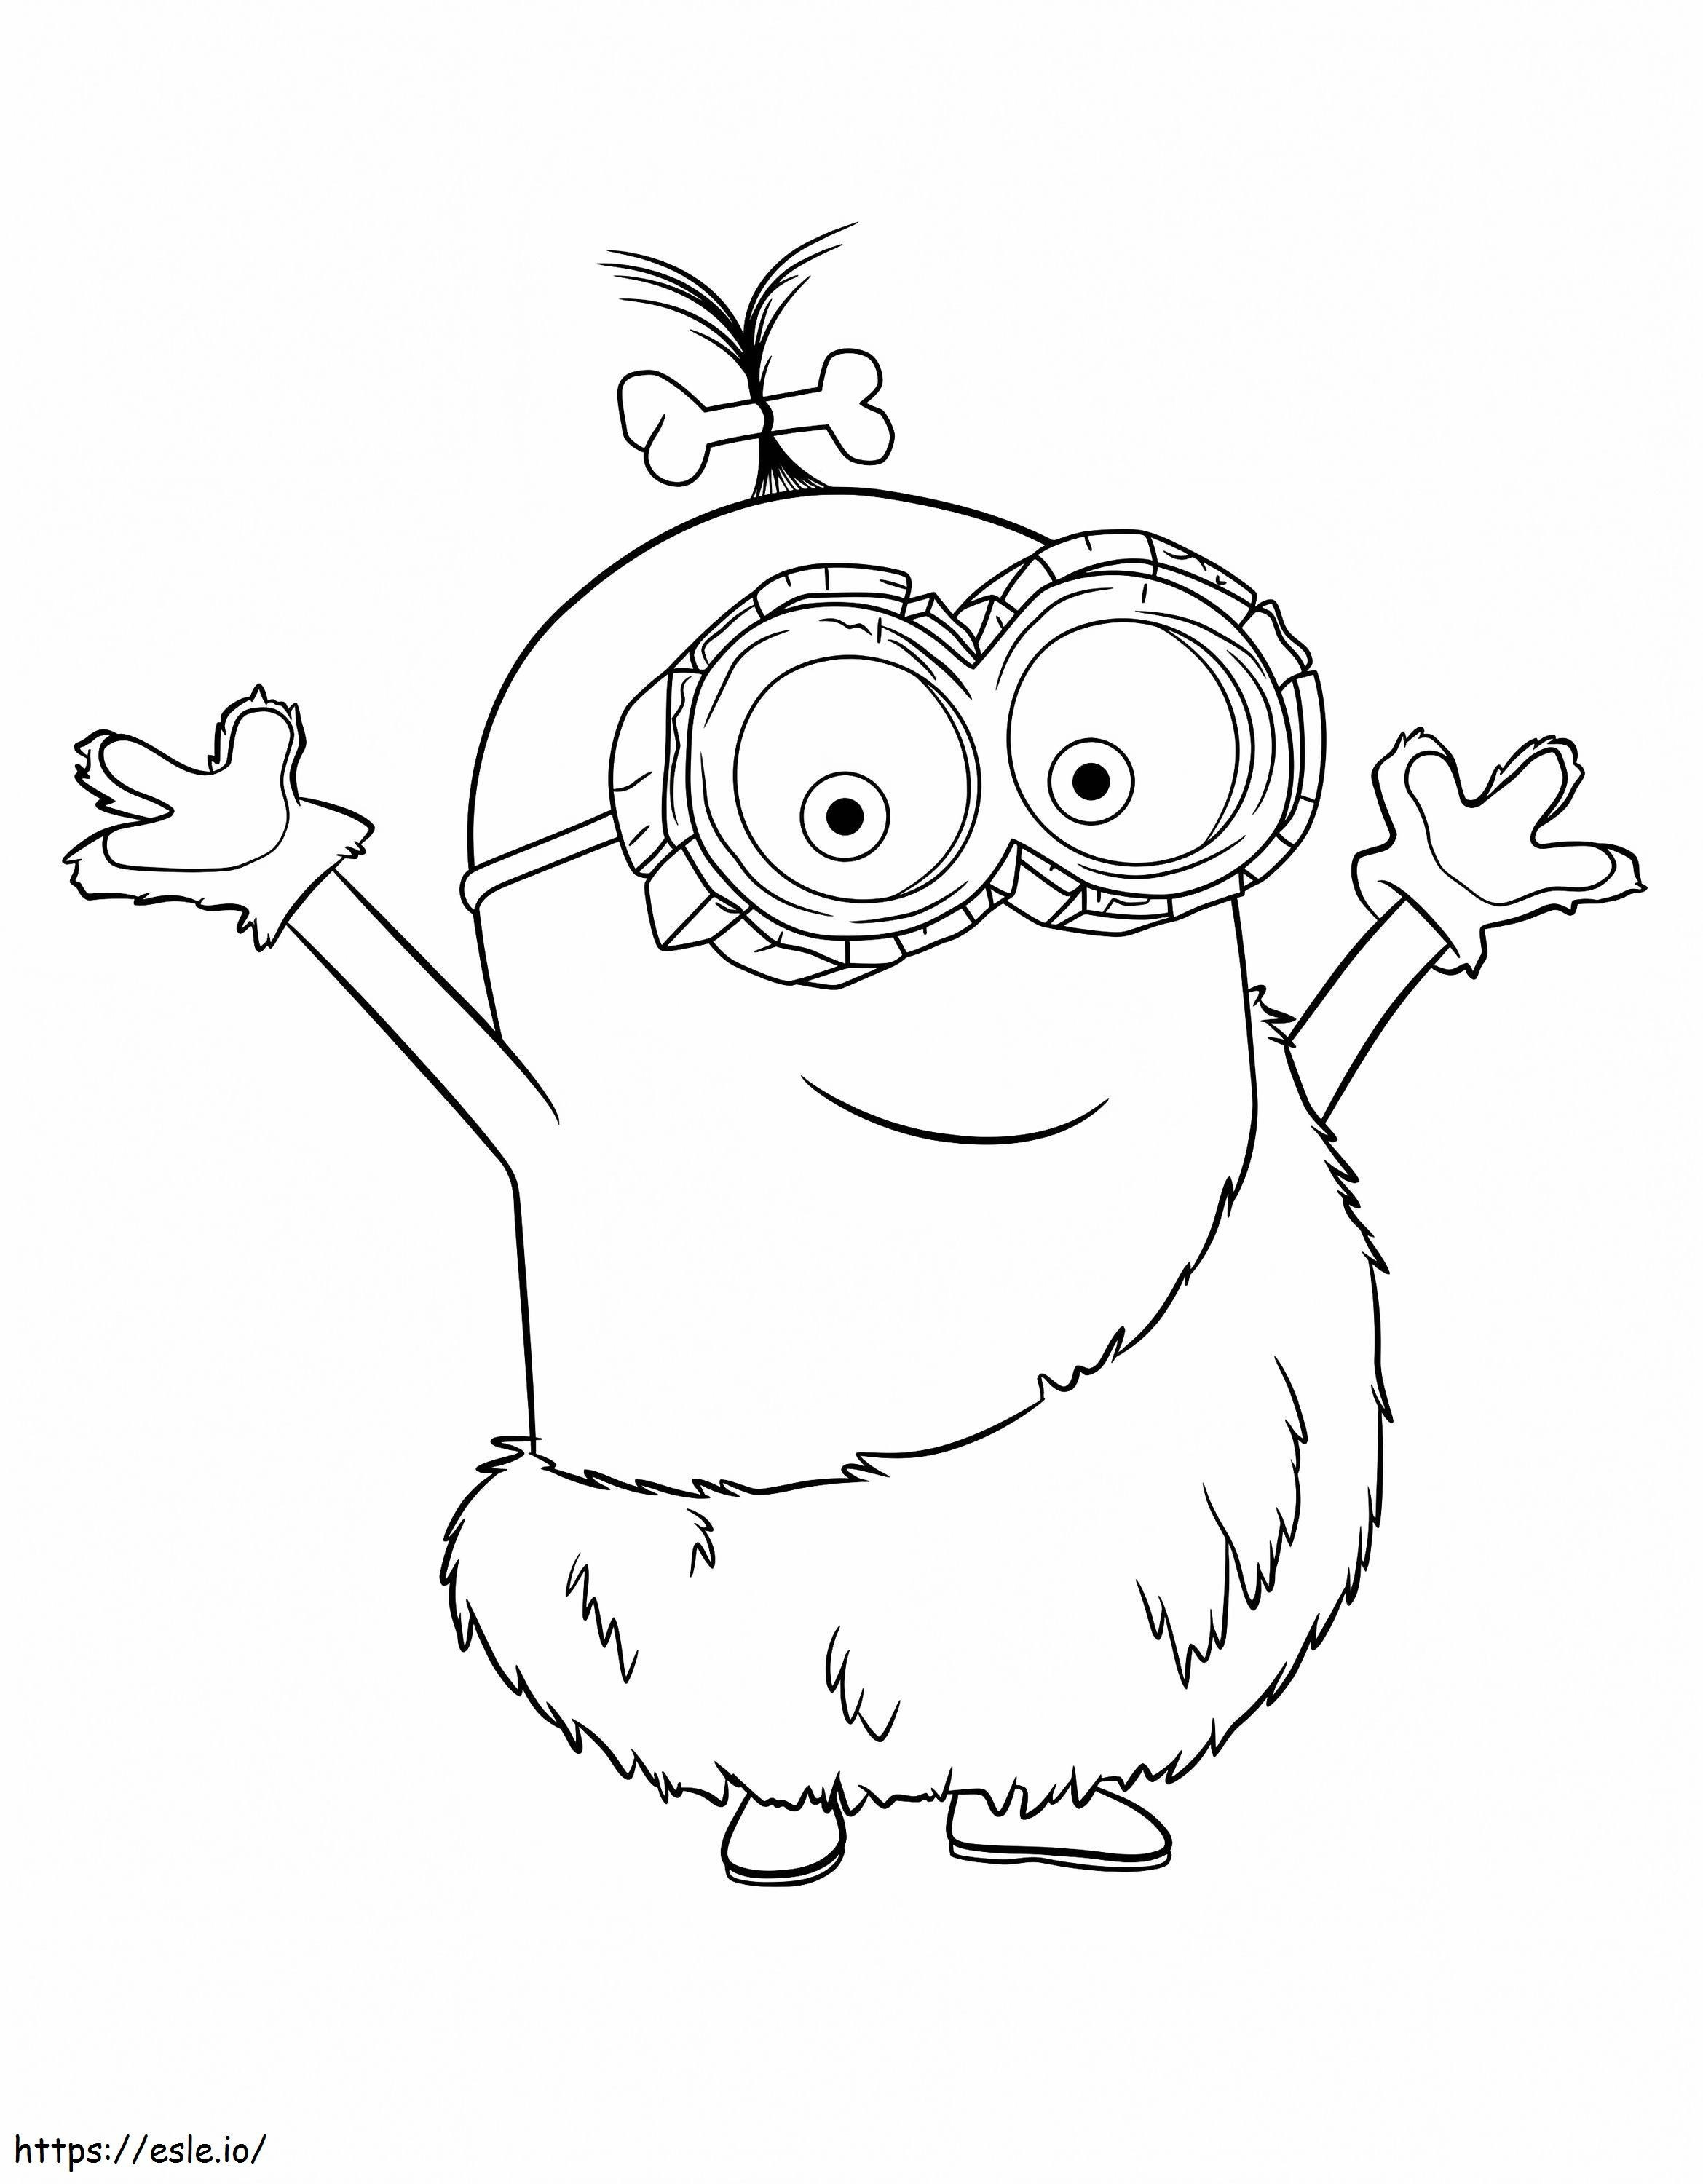 Minions 12 coloring page